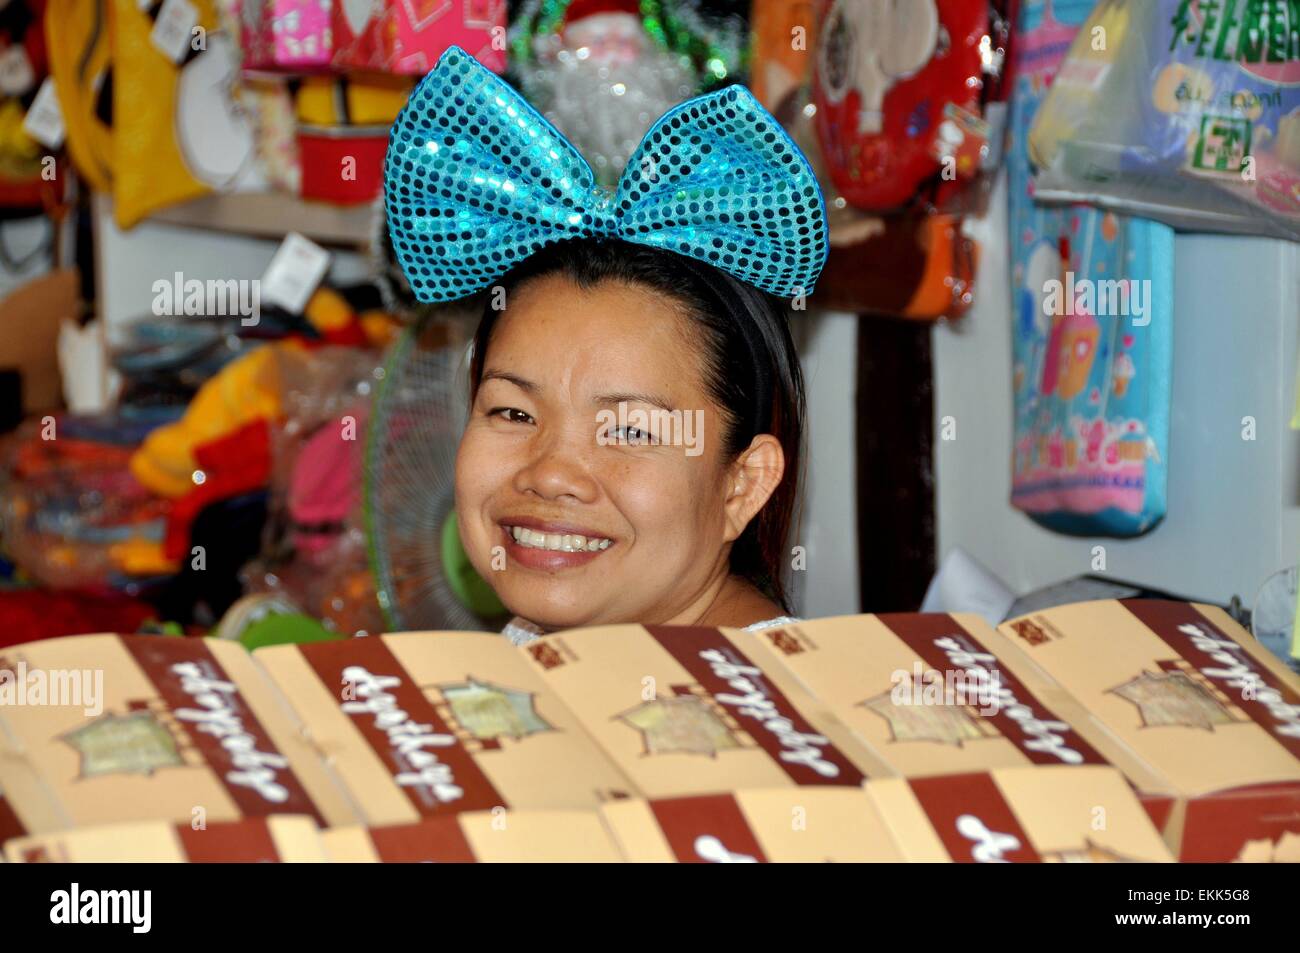 Ayutthaya, Thailand:  Smiling woman with a big blue hair bow in her booth at the Ayutthaya Floating Market Stock Photo